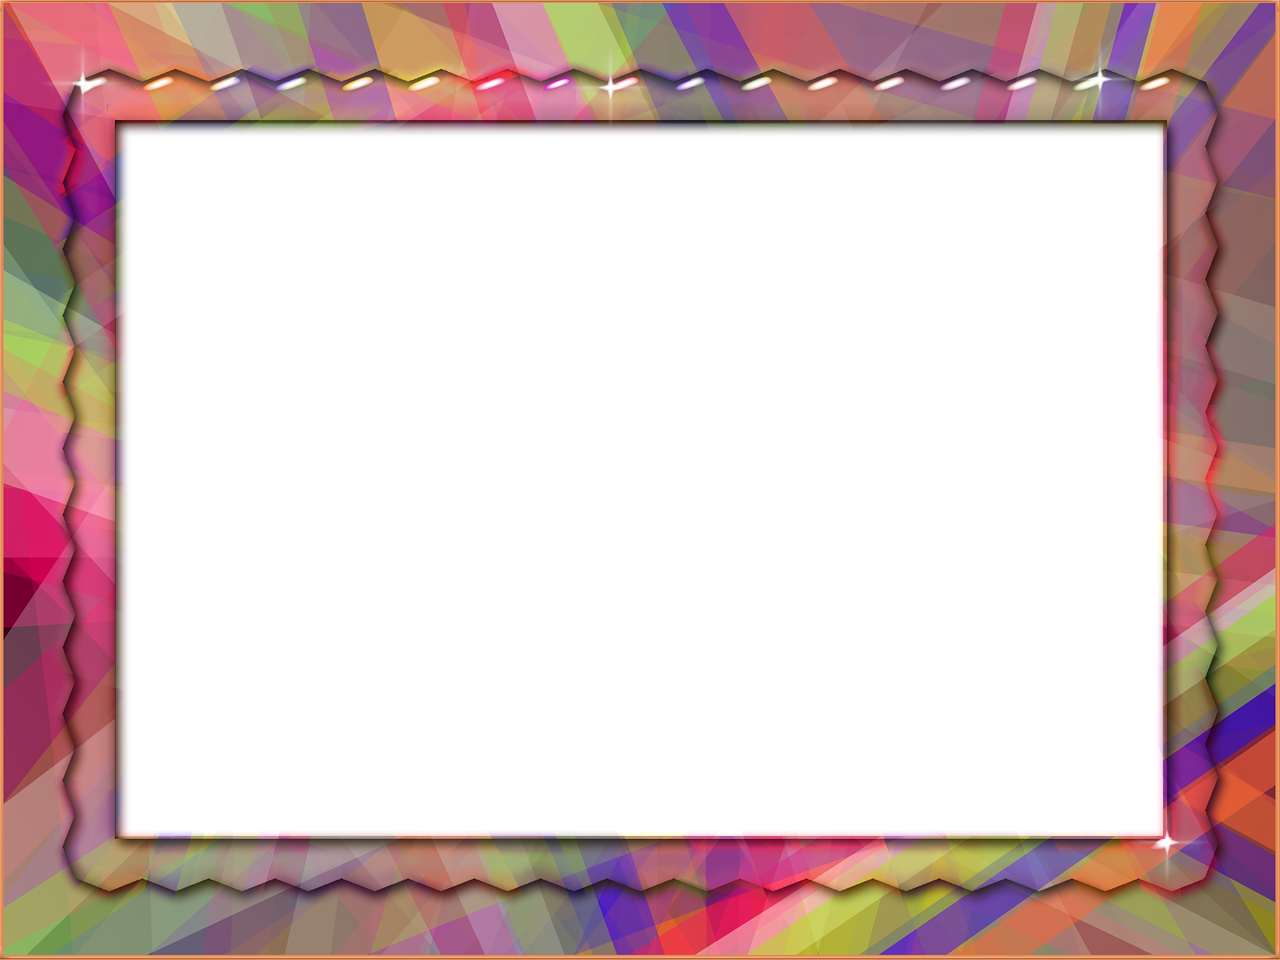 a picture of a picture of a picture of a picture of a picture of a picture of a picture of a picture of a picture of a, flickr, panfuturism, inside stylized border, background is white and blank, soft rainbow, wide frame